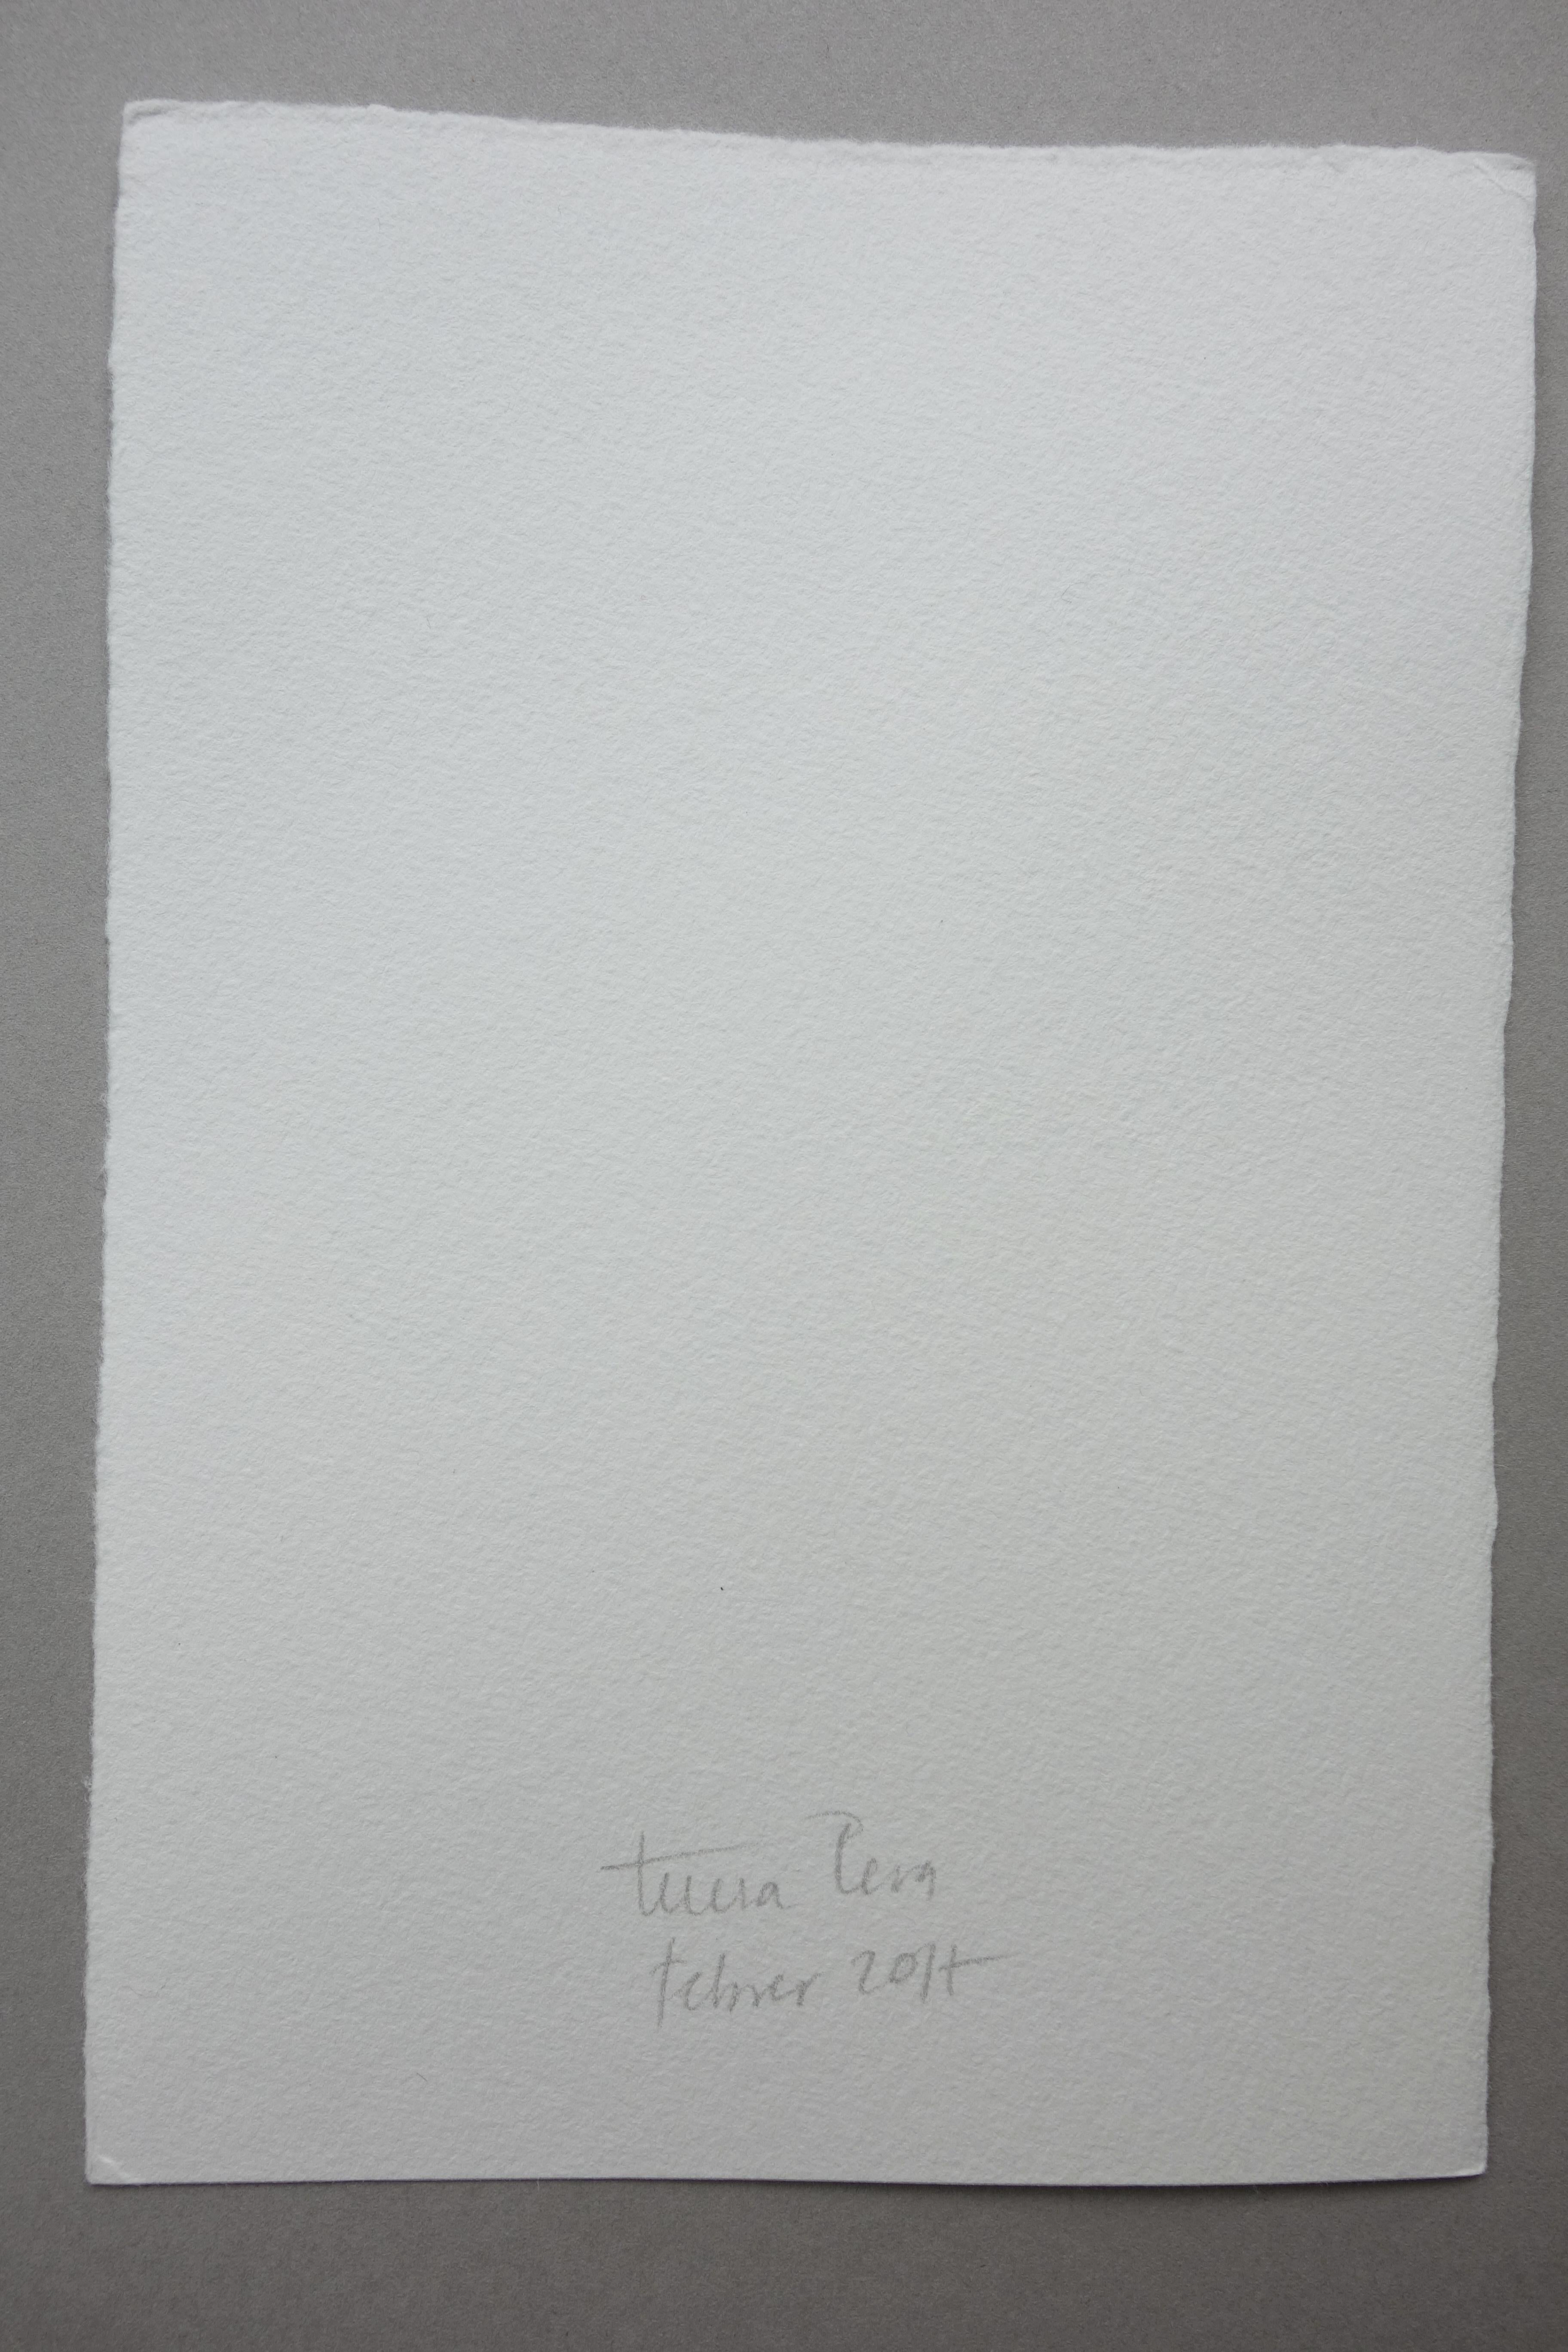 Calligraphy of water - 21st century watercolour - conceptual- Teresa Pera  For Sale 4